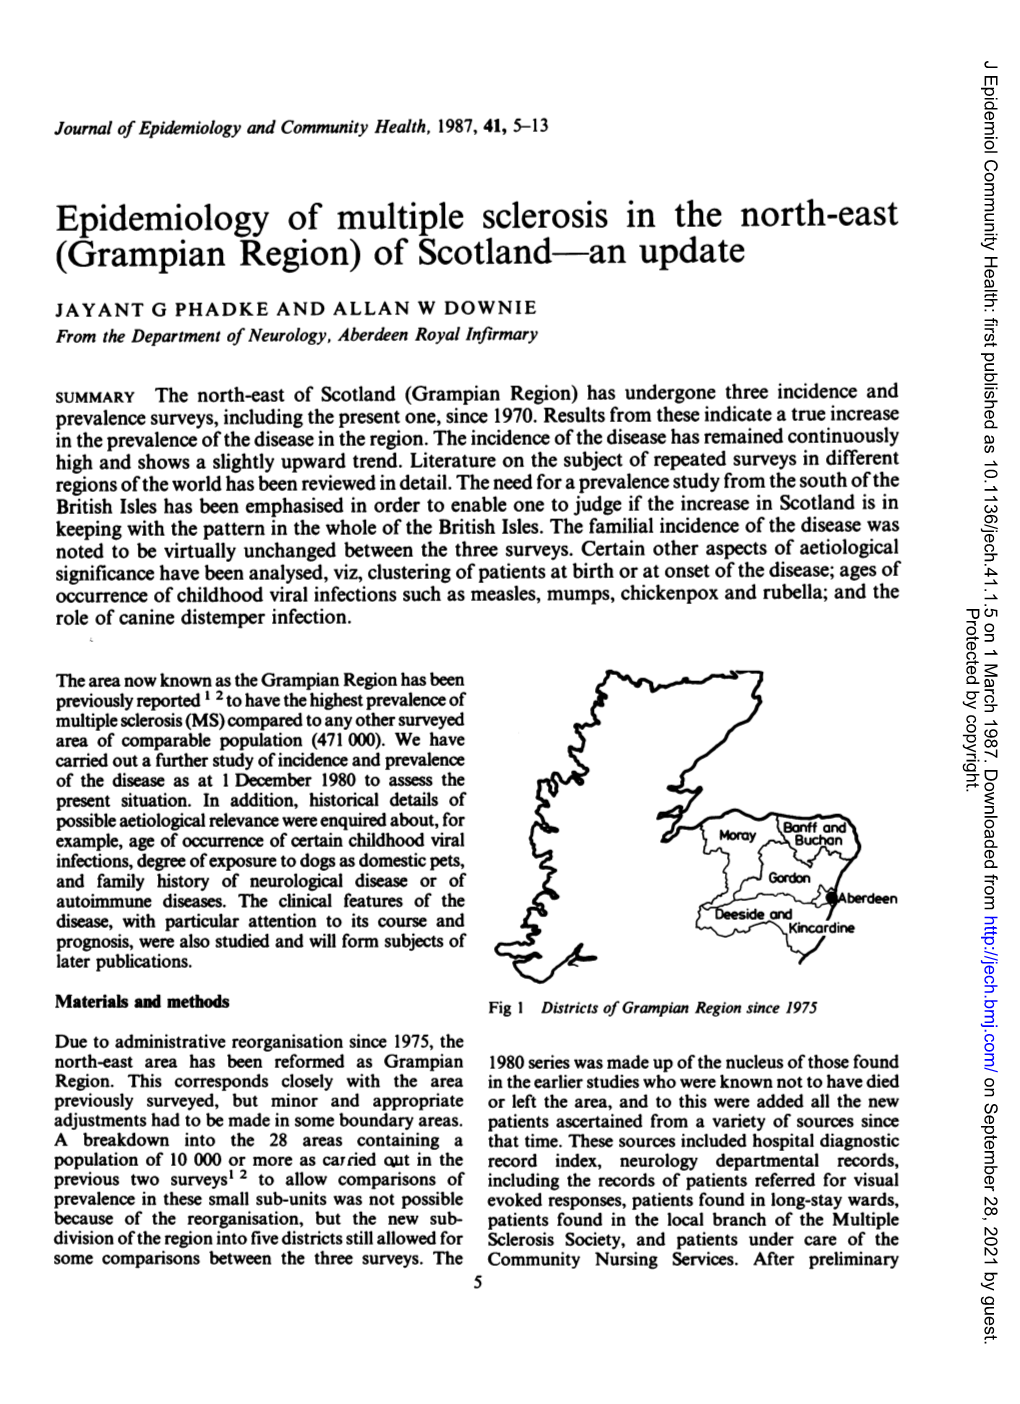 Epidemiology of Multiple Sclerosis in the North-East (Grampian Region) of Scotland-An Update